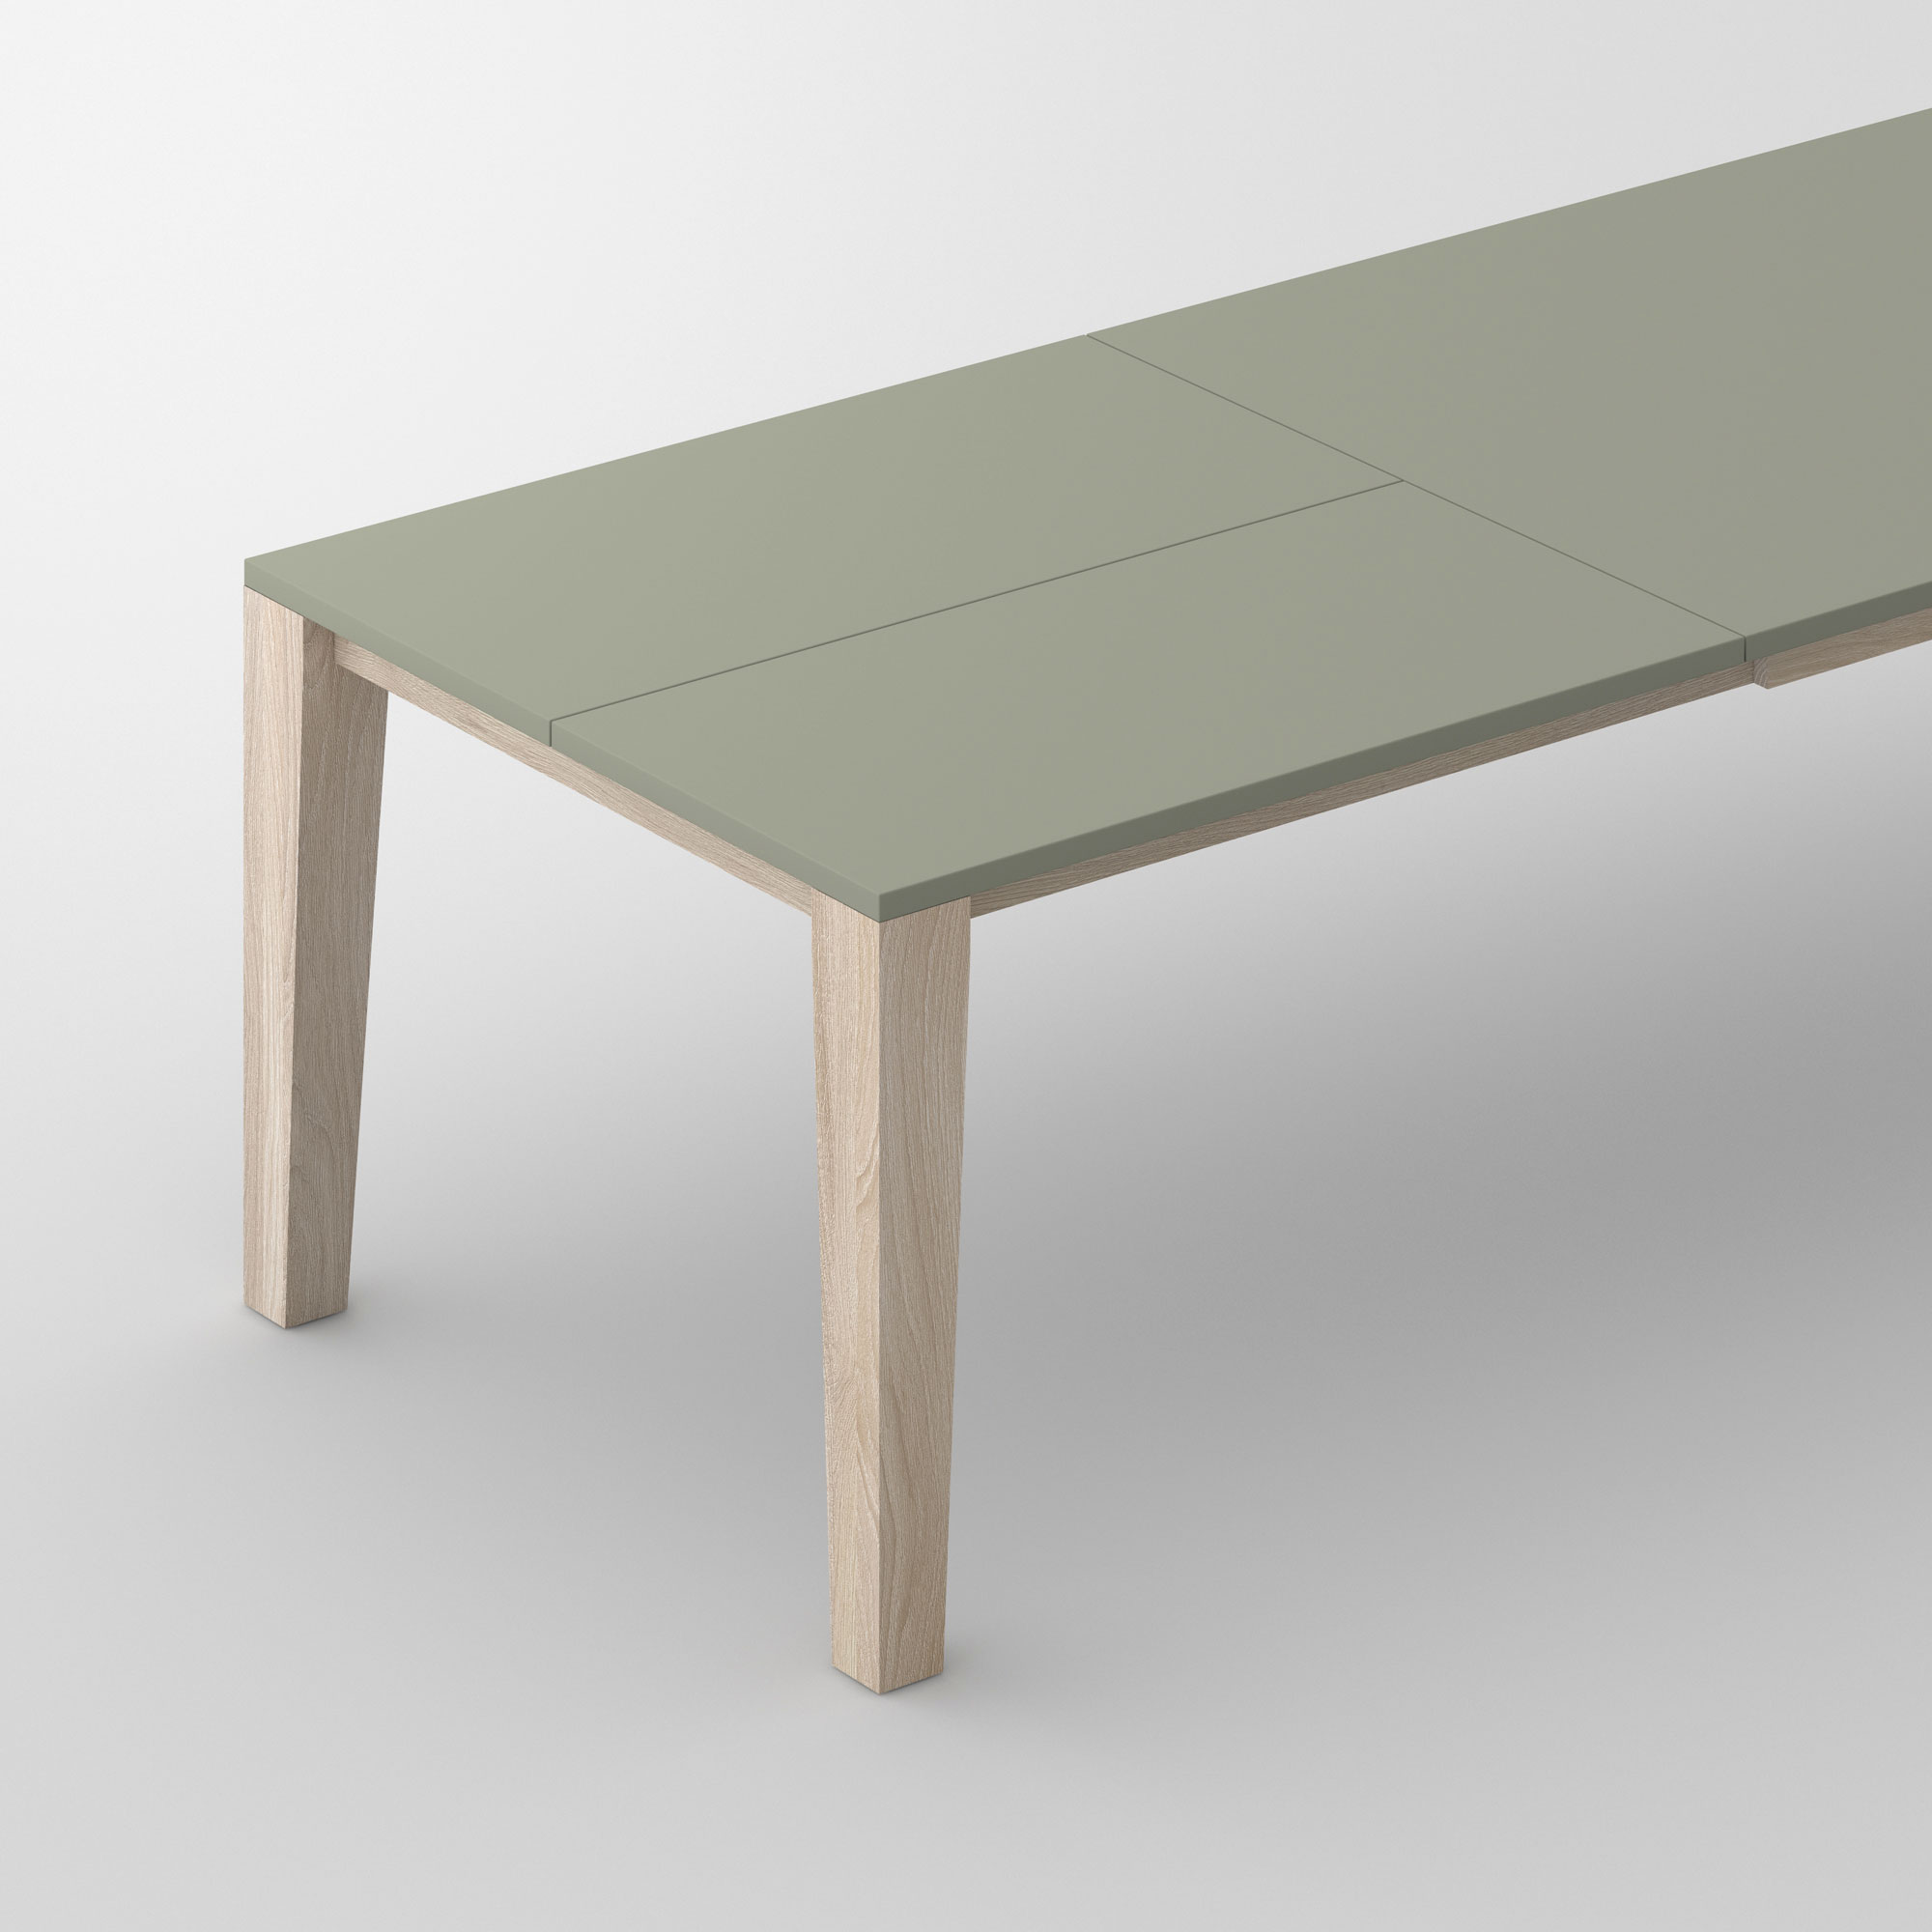 Extensible Linoleum Wood Table VARIUS BUTTERFLY LINO cam1 custom made in solid wood by vitamin design